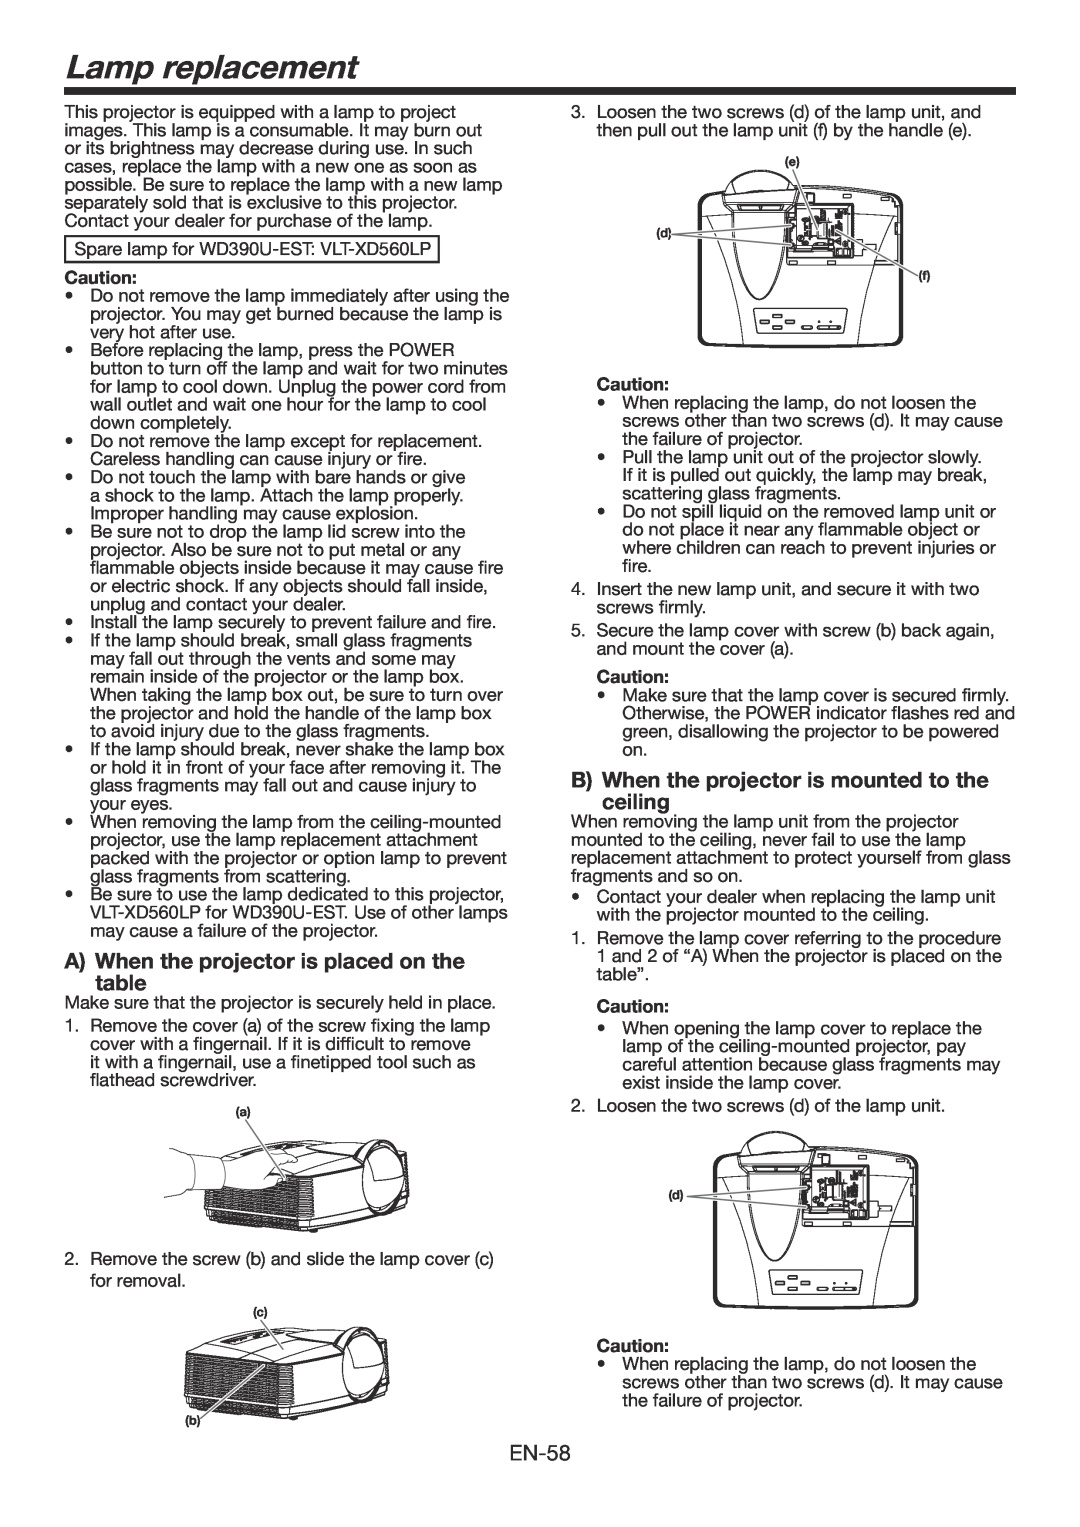 Mitsubishi Electronics WD390U-EST user manual Lamp replacement, A When the projector is placed on the table 